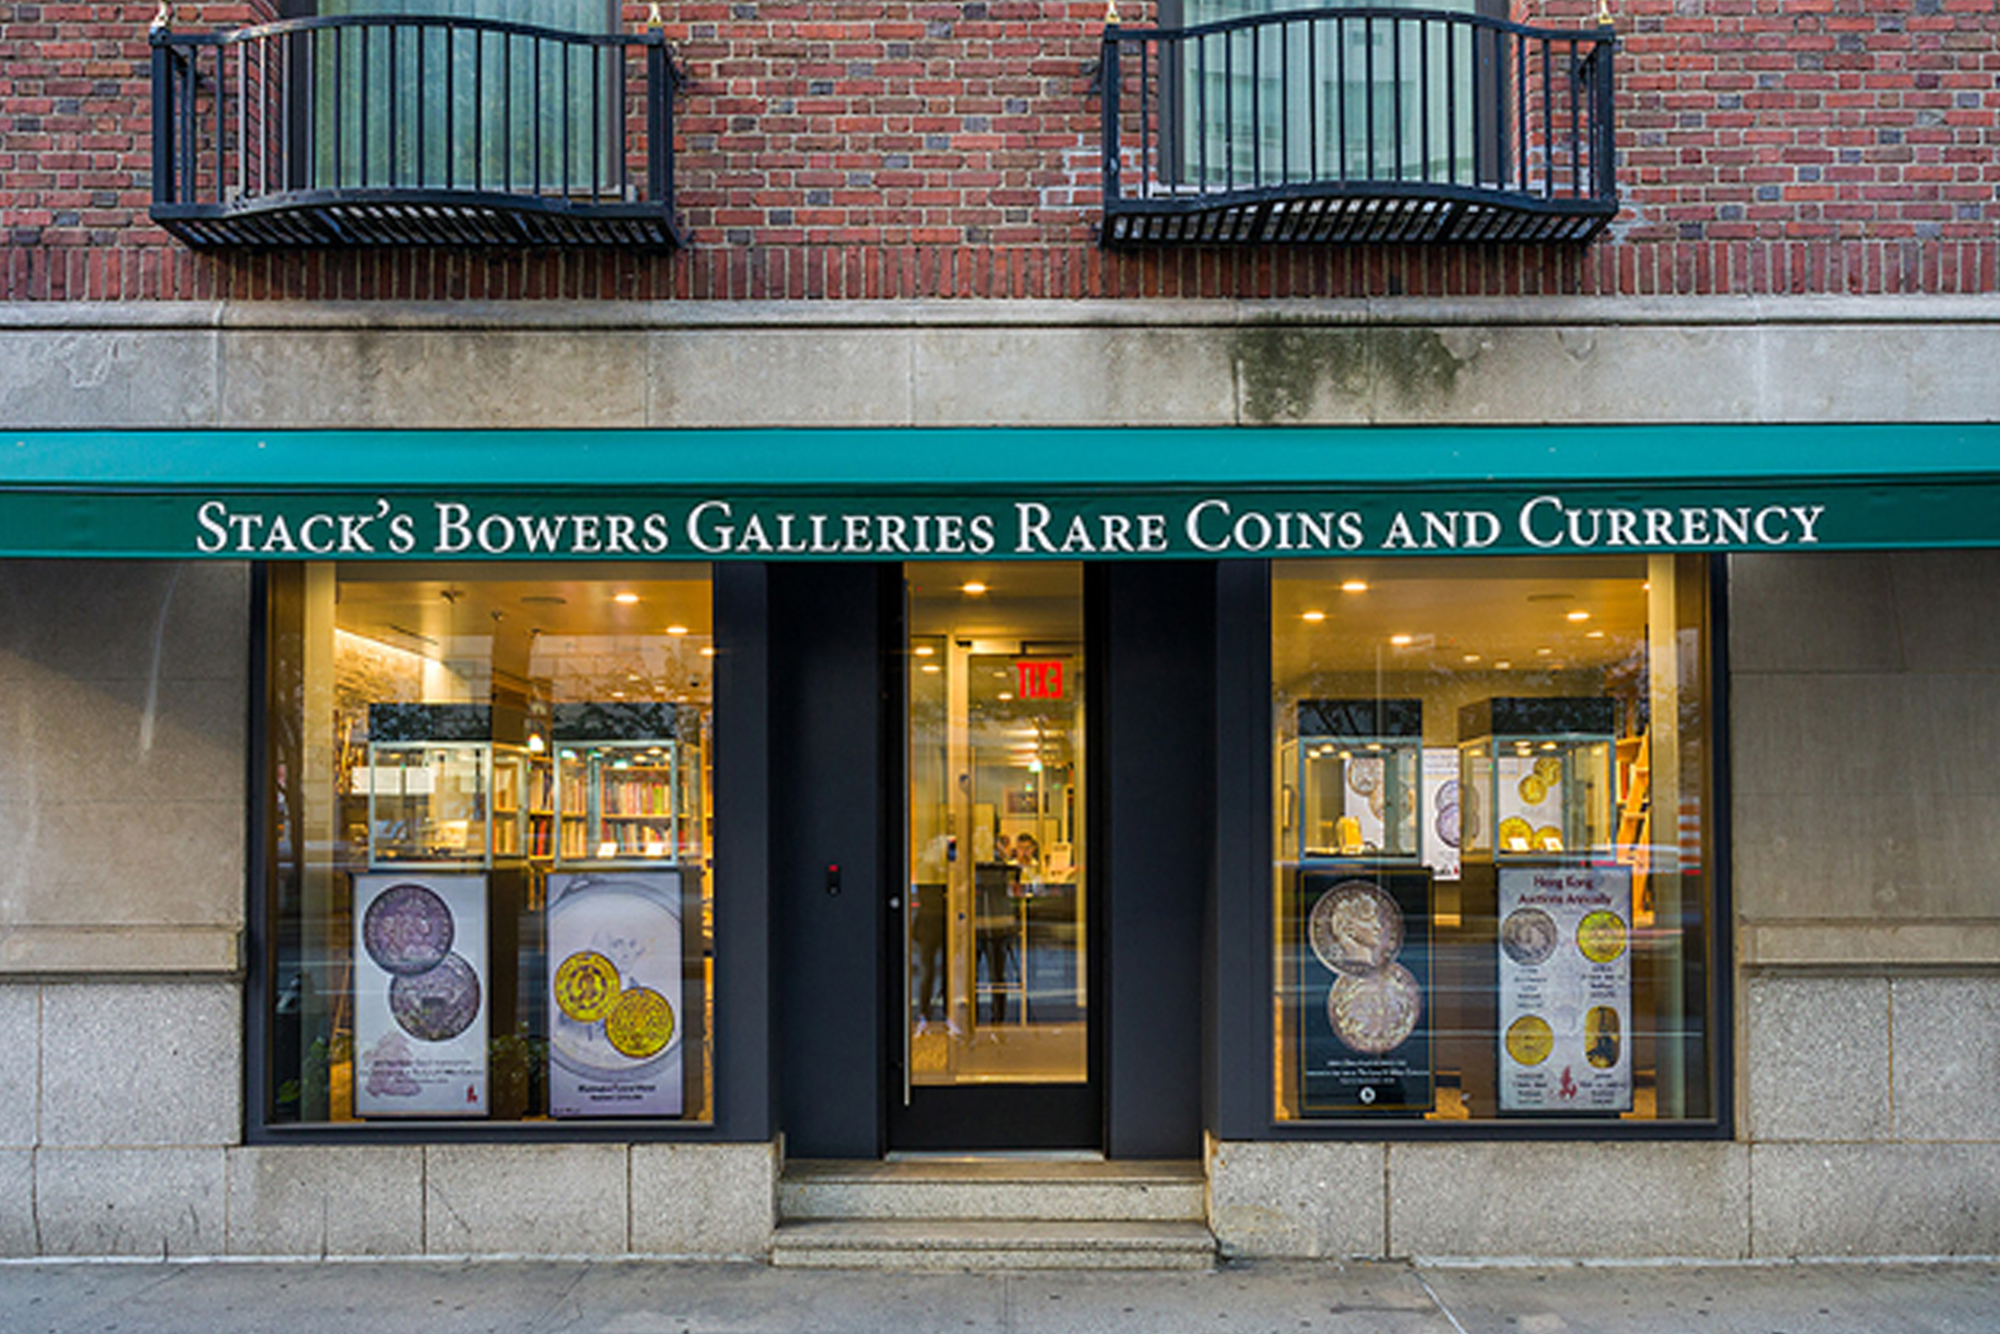 Stack's Bowers Galleries on the App Store